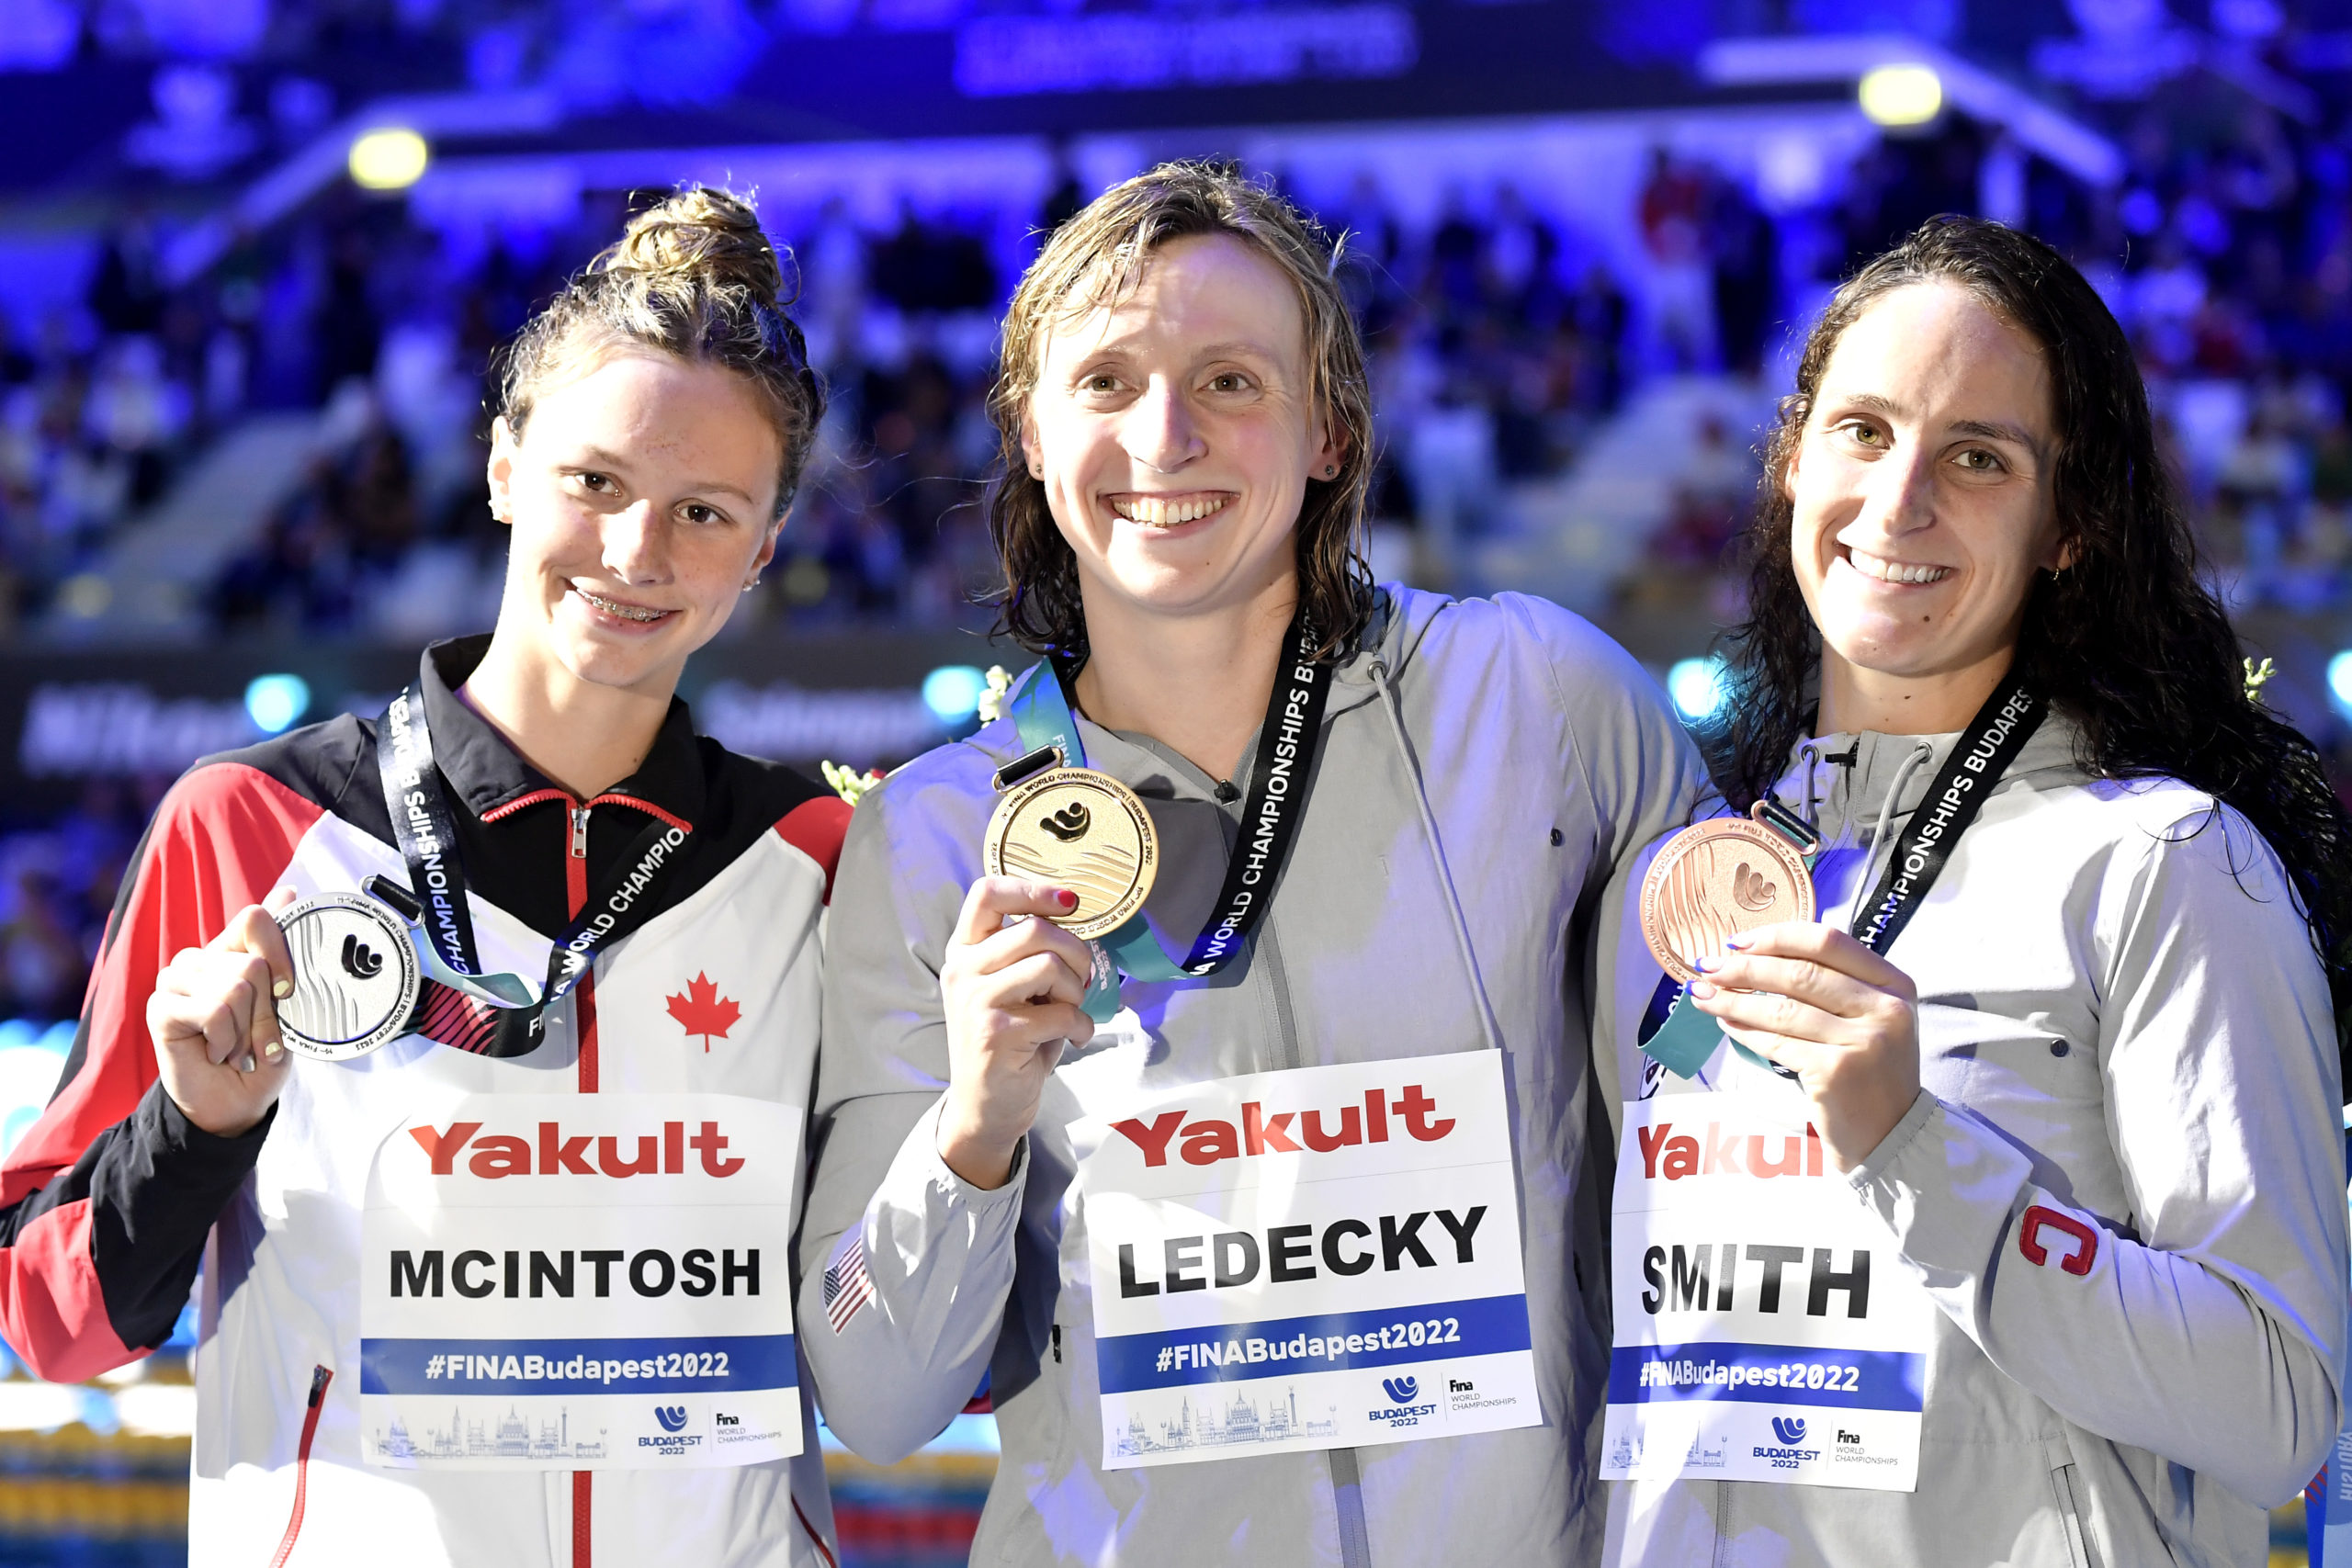 Summer McIntosh of Canada, Katie Ledecky of United States and Leah Smith of United States show their medal after compete in the swimming 400m Freestyle Women Final during the FINA 19th World Championships Budapest 2022 at Duna Arena, Budapest (Hungary), June 18th, 2022. Katie Ledecky placed first winning the gold medal, Summer Mcintosh placed second, Leah Smith placed third. . Photo Andrea Staccioli / Deepbluemedia / Insidefoto